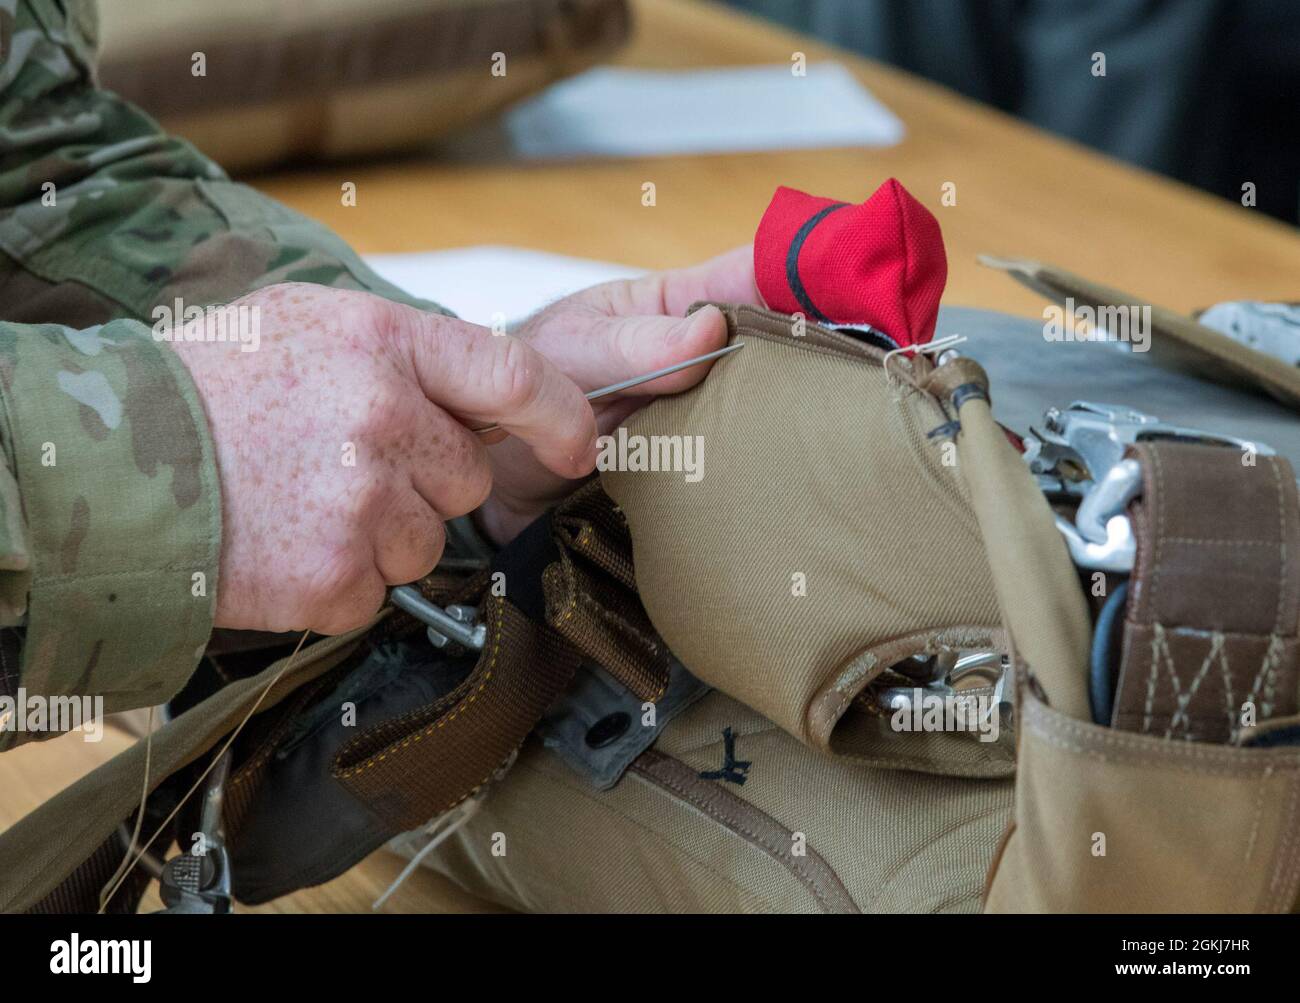 Tech. Sgt. Ronald Patton, aircrew flight equipment technician for the 403rd Operations Support Squadron at Keesler Air Force Base, Miss., reinforces a BA-30 Low Profile Parachute system April 29, 2021. Patton repairs flight equipment to ensure it is safe to use in the event of an in-flight emergency. Stock Photo